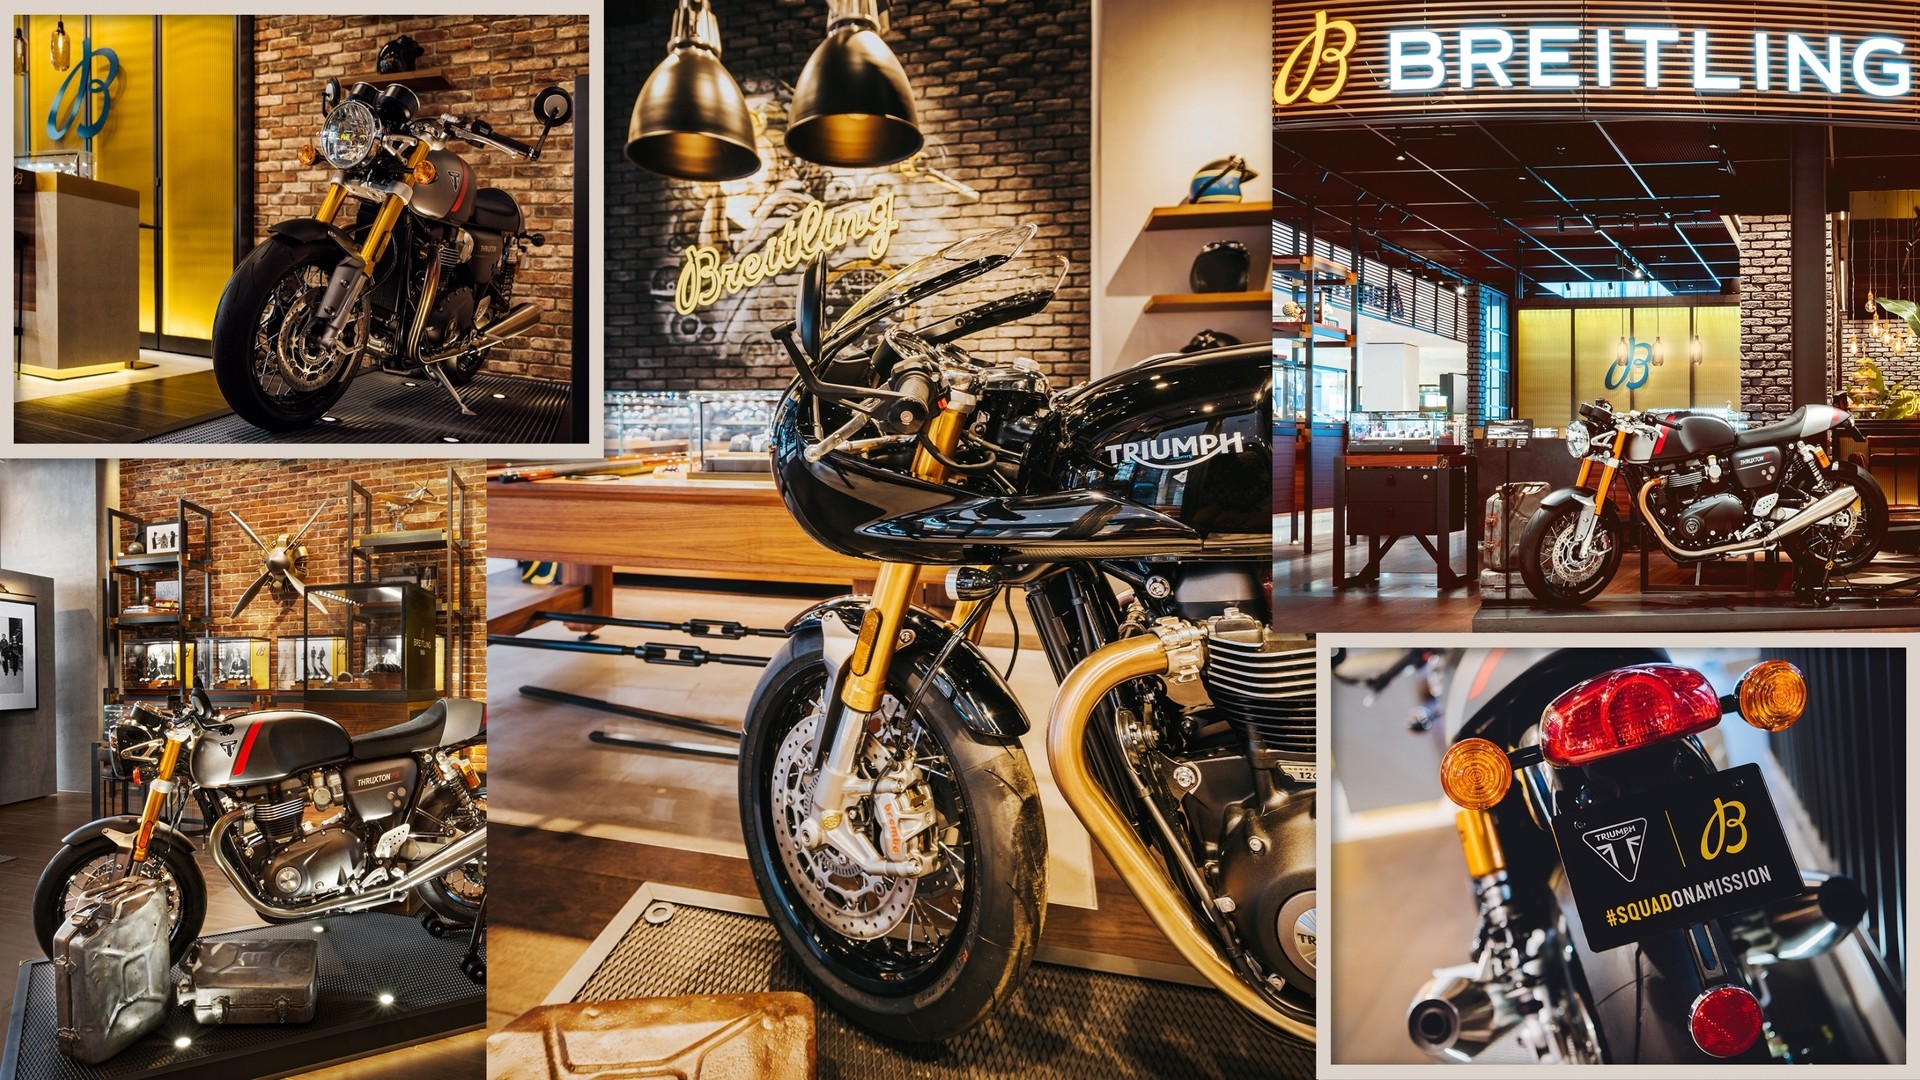 https://static.breitling.cn/media/wysiwyg/news/21-7-14/001-breitling-and-triumph_ready-to-explore-new-horizons_triumph-motorcycles-are-now-on-display-in-breitling-boutiques.jpg